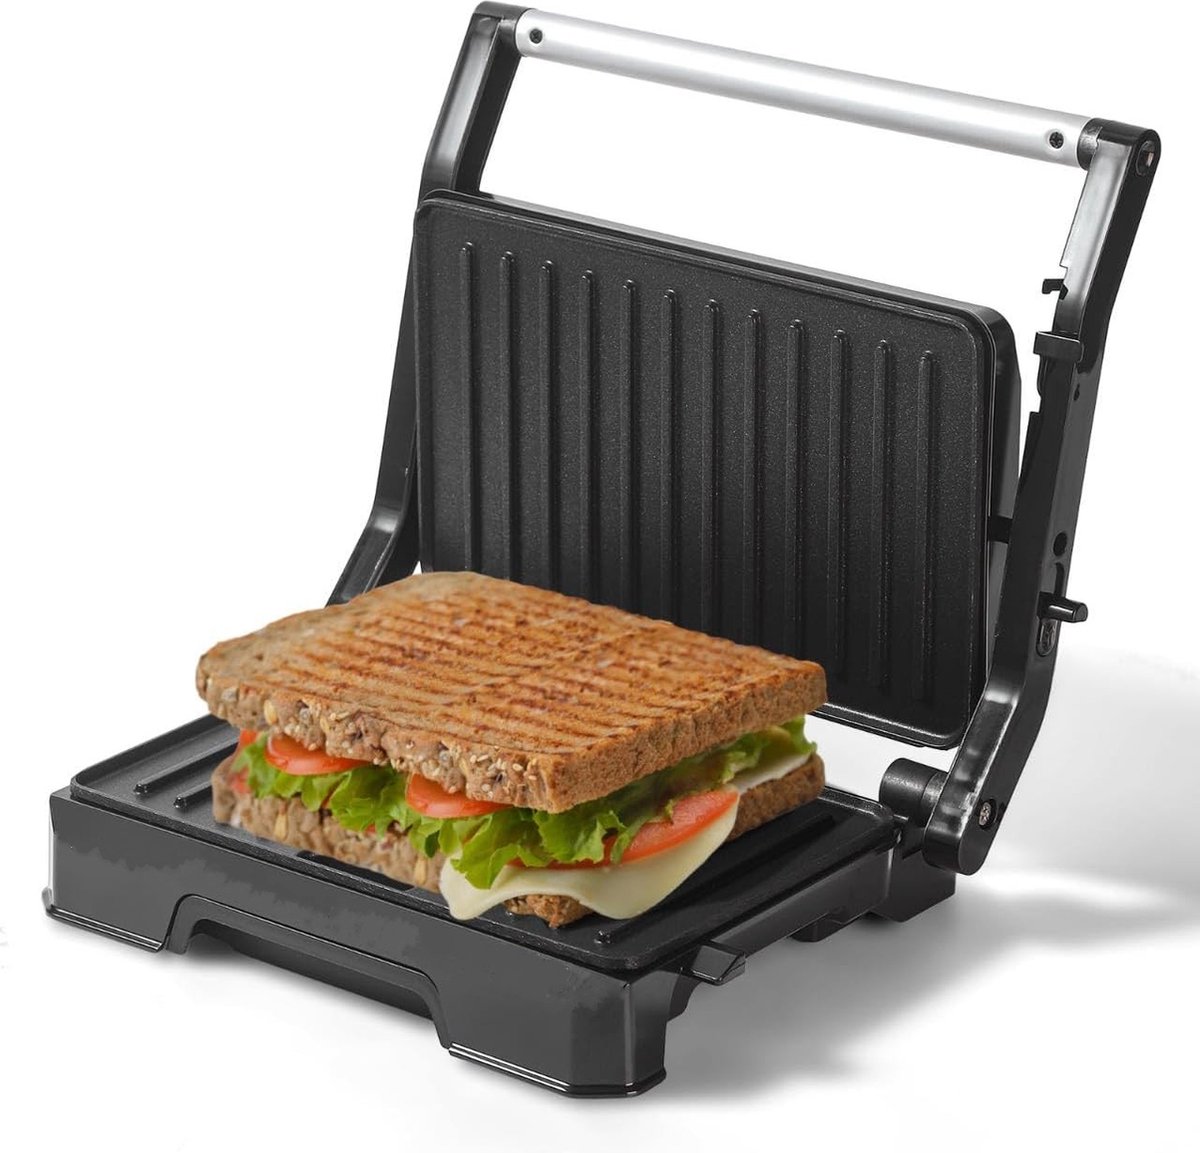 Royalty Line® PM1000 Tosti Apparaat - Kleine Contactgrill - Panini Grill - 1000W - Toaster Grill - 23 x 15 cm - Tosti Ijzer - Grill Apparaat - Tosti Ijzers Met Zwevende Plaat - Zwart - Royalty line